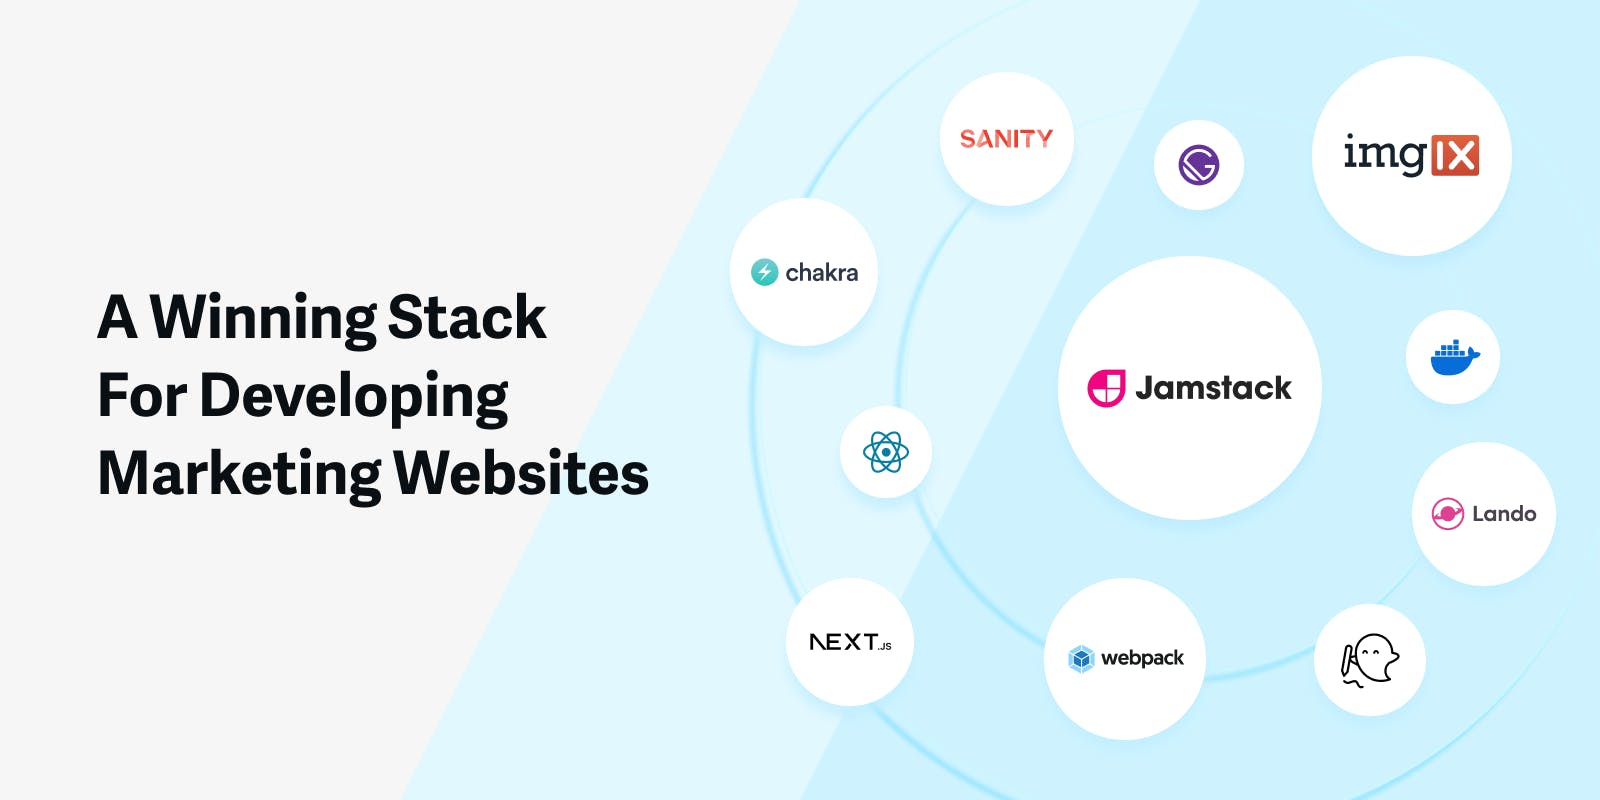 Discover the top tools and strategies for efficient website development today. Learn from Cantilever&#39;s CEO, Ty Fujimura, how Jamstack tools boost page speed and SEO for standout marketing and news sites. See how tools like imgix, React.js, and Next.js enhanced performance and user experience.